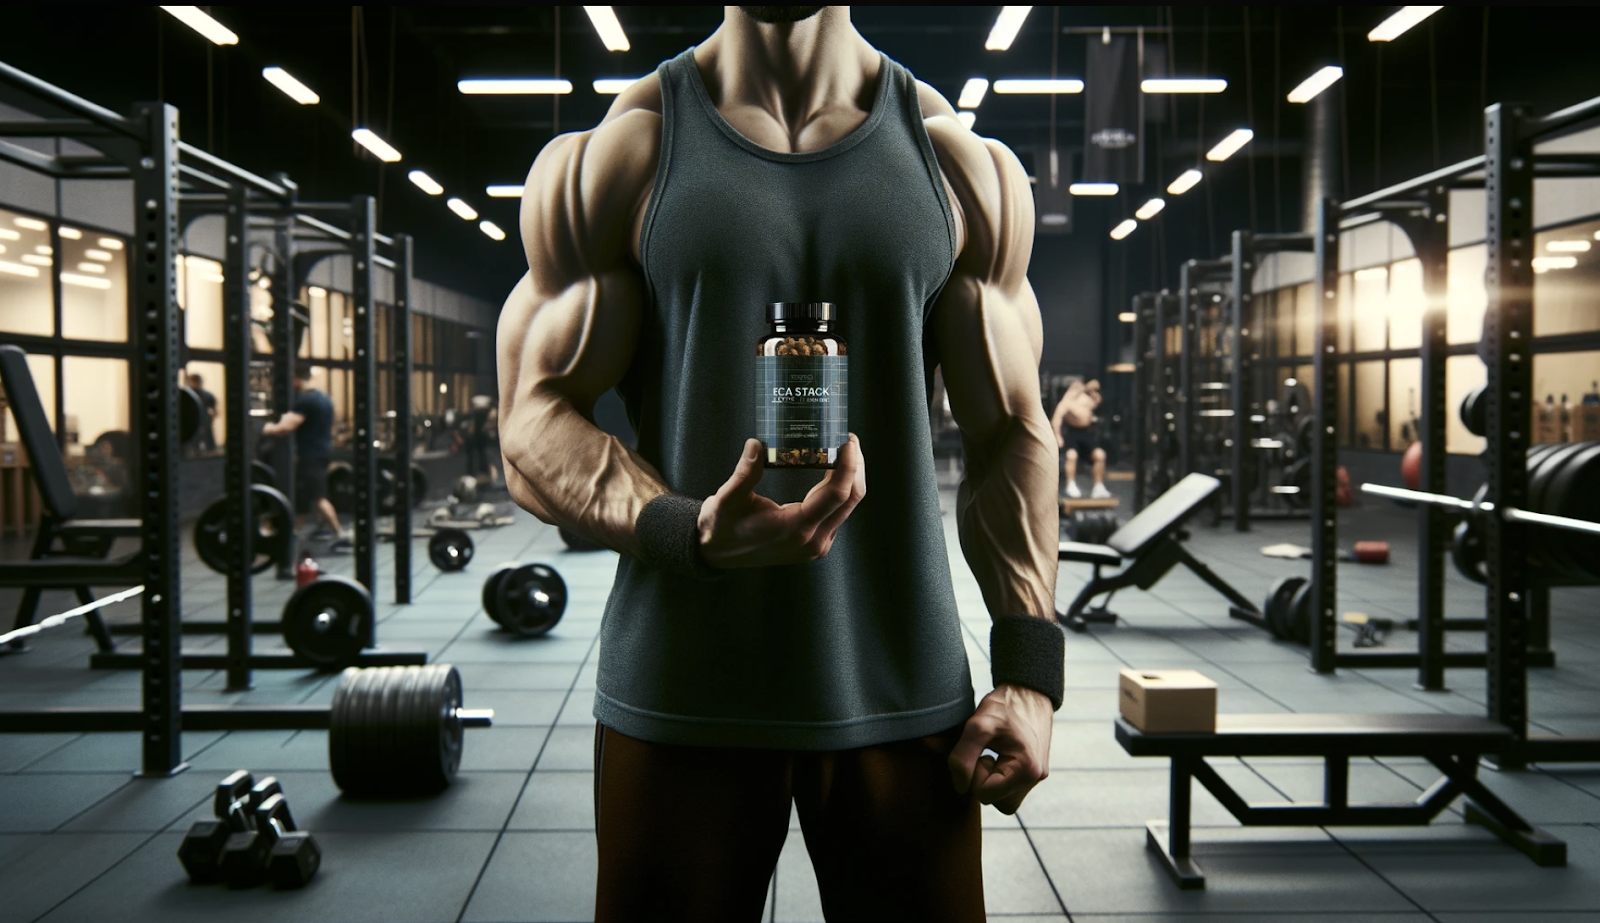 As a dedicated bodybuilder, I'm always on the lookout for safe and effective ways to shed excess body fat and get ripped. One supplement stack that has gained widespread popularity in the bodybuilding community is the ECA stack